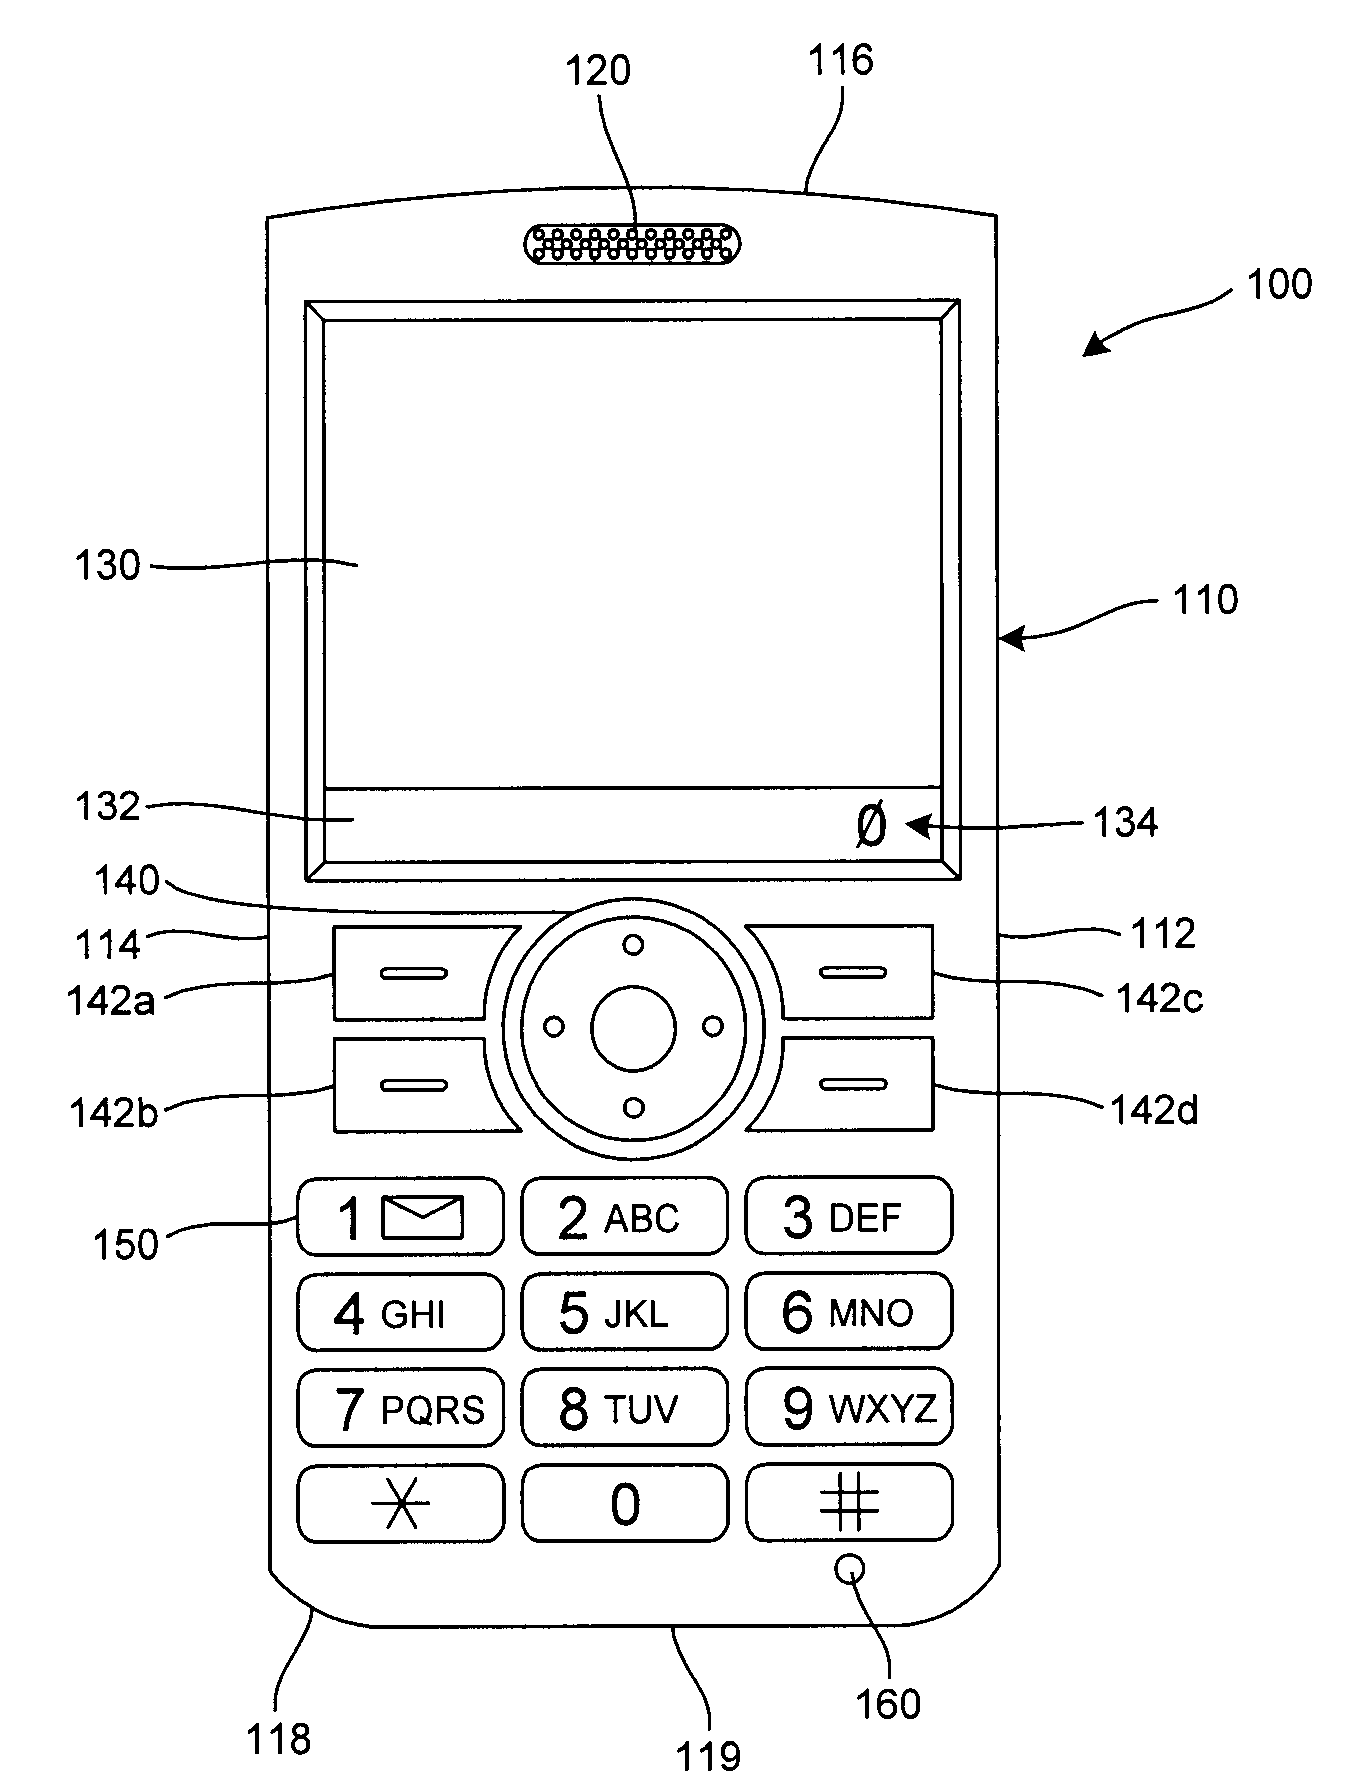 Electronic level application for portable communication device